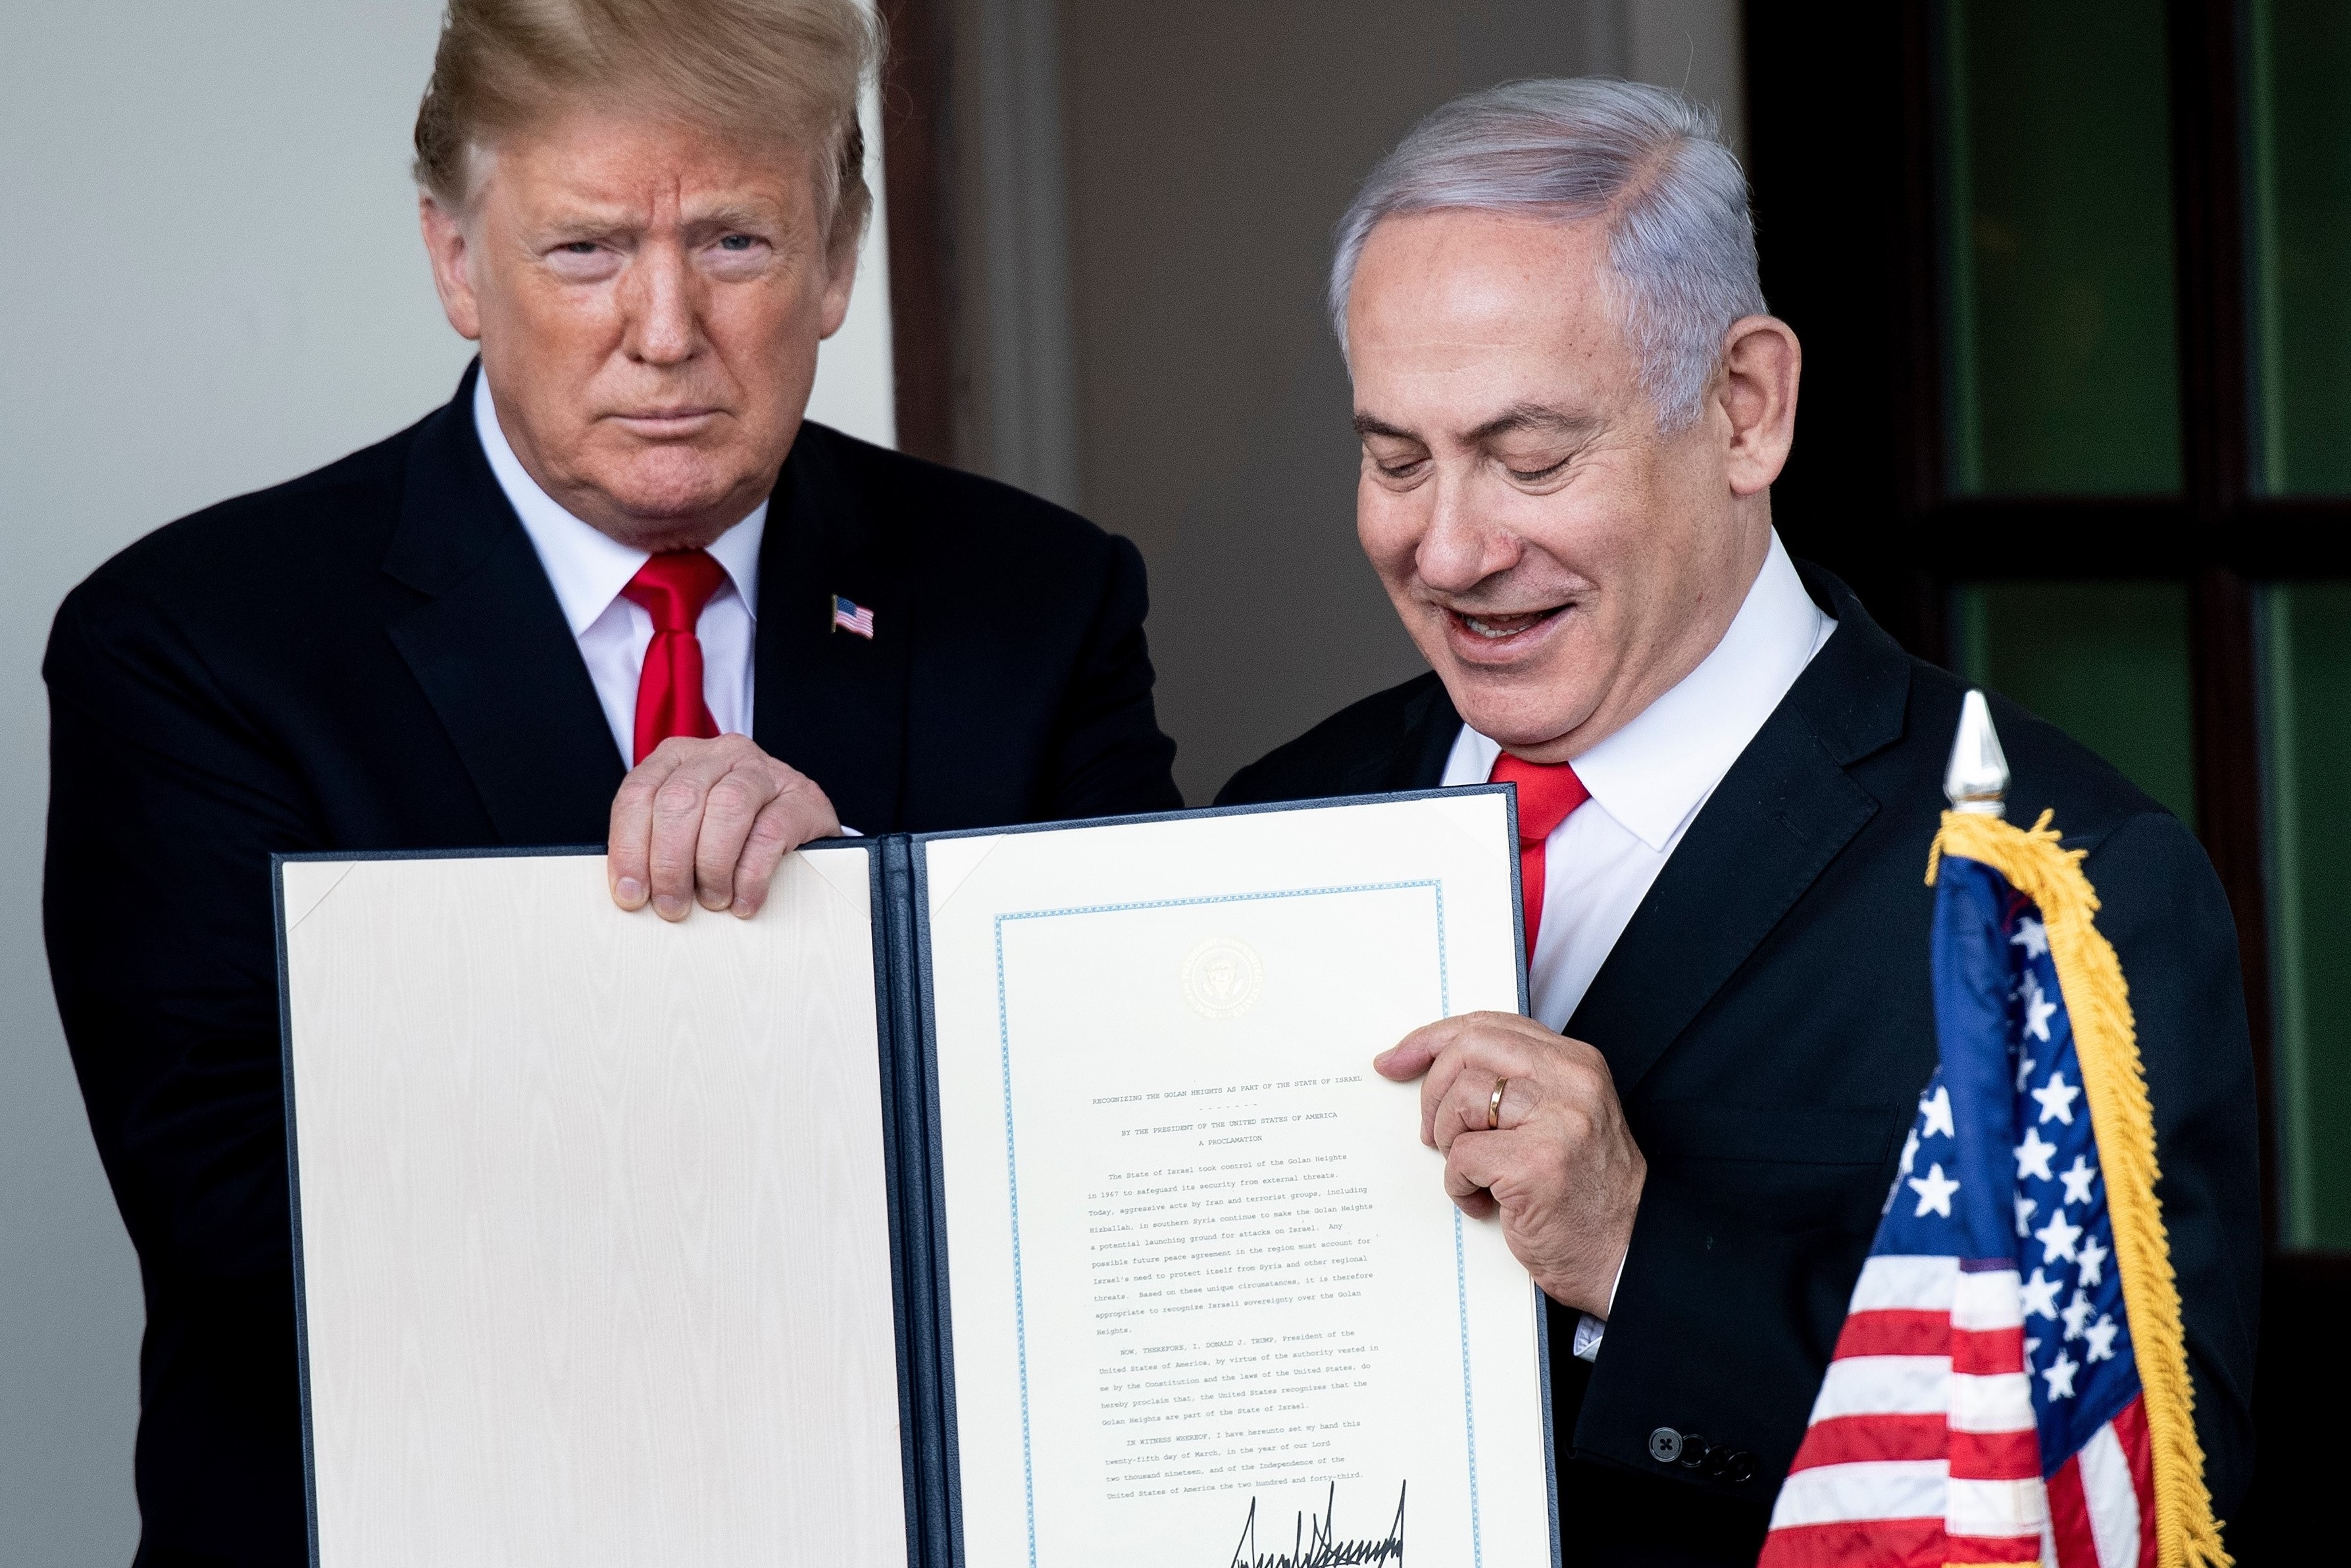 US President Donald Trump (L) and Israel's Prime Minister Benjamin Netanyahu hold up a Golan Heights proclamation on 25 March, 2019 in Washington (AFP)